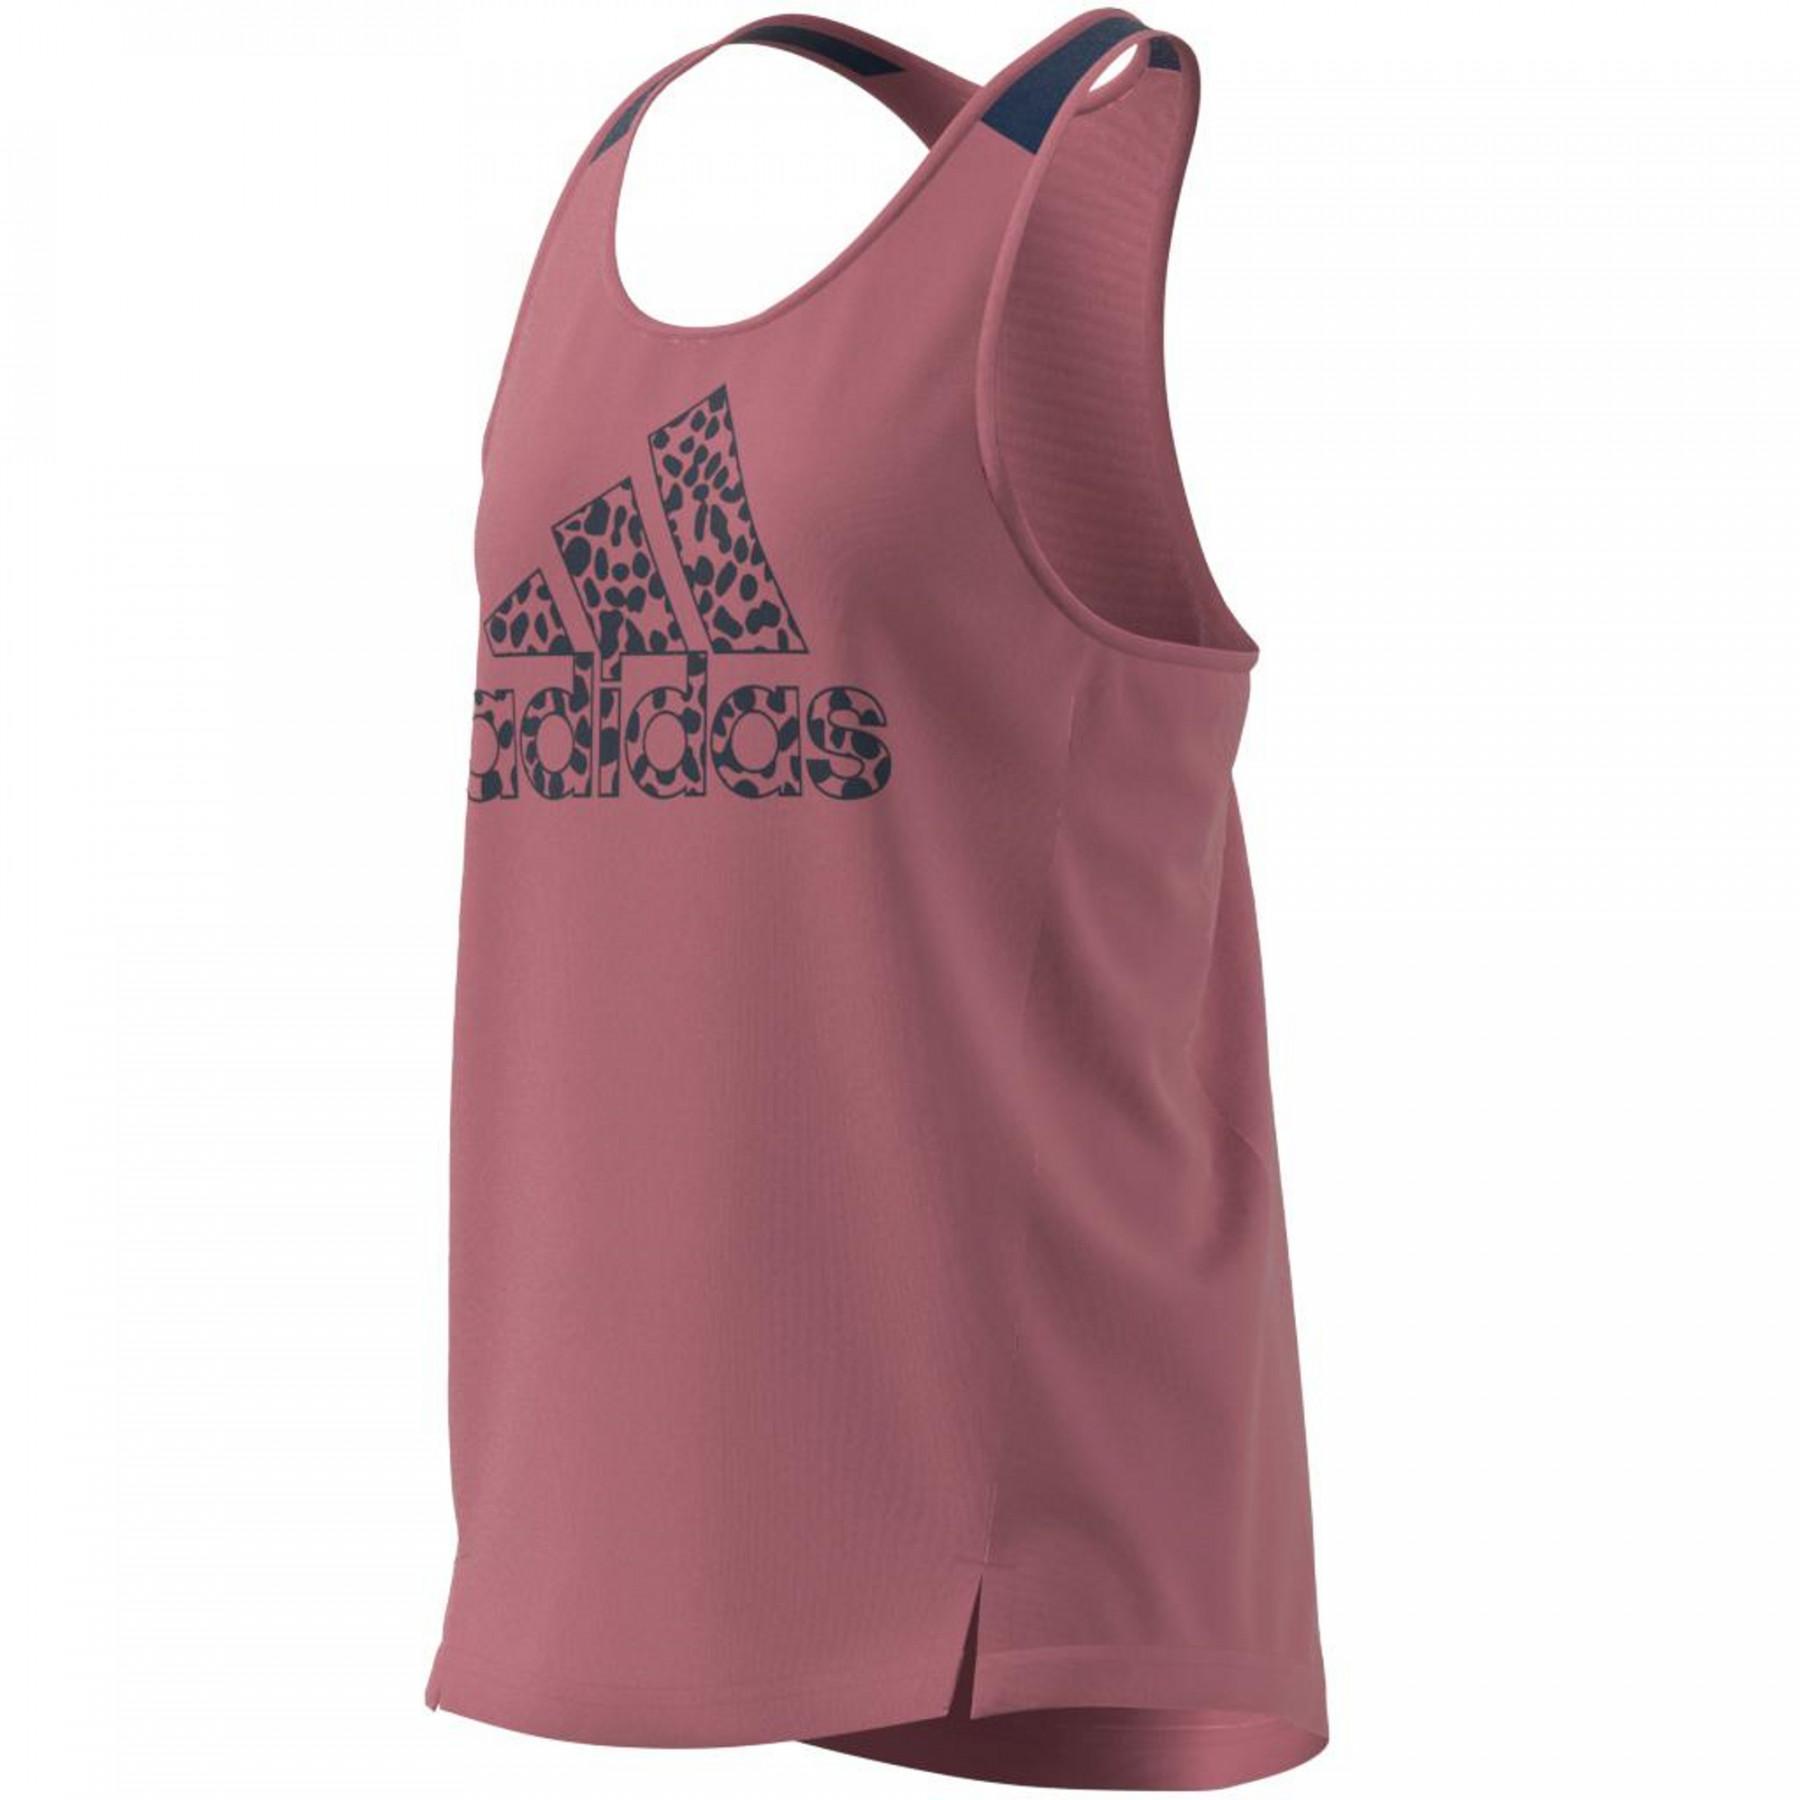 Children's tank top adidas Designed To Move Leopard